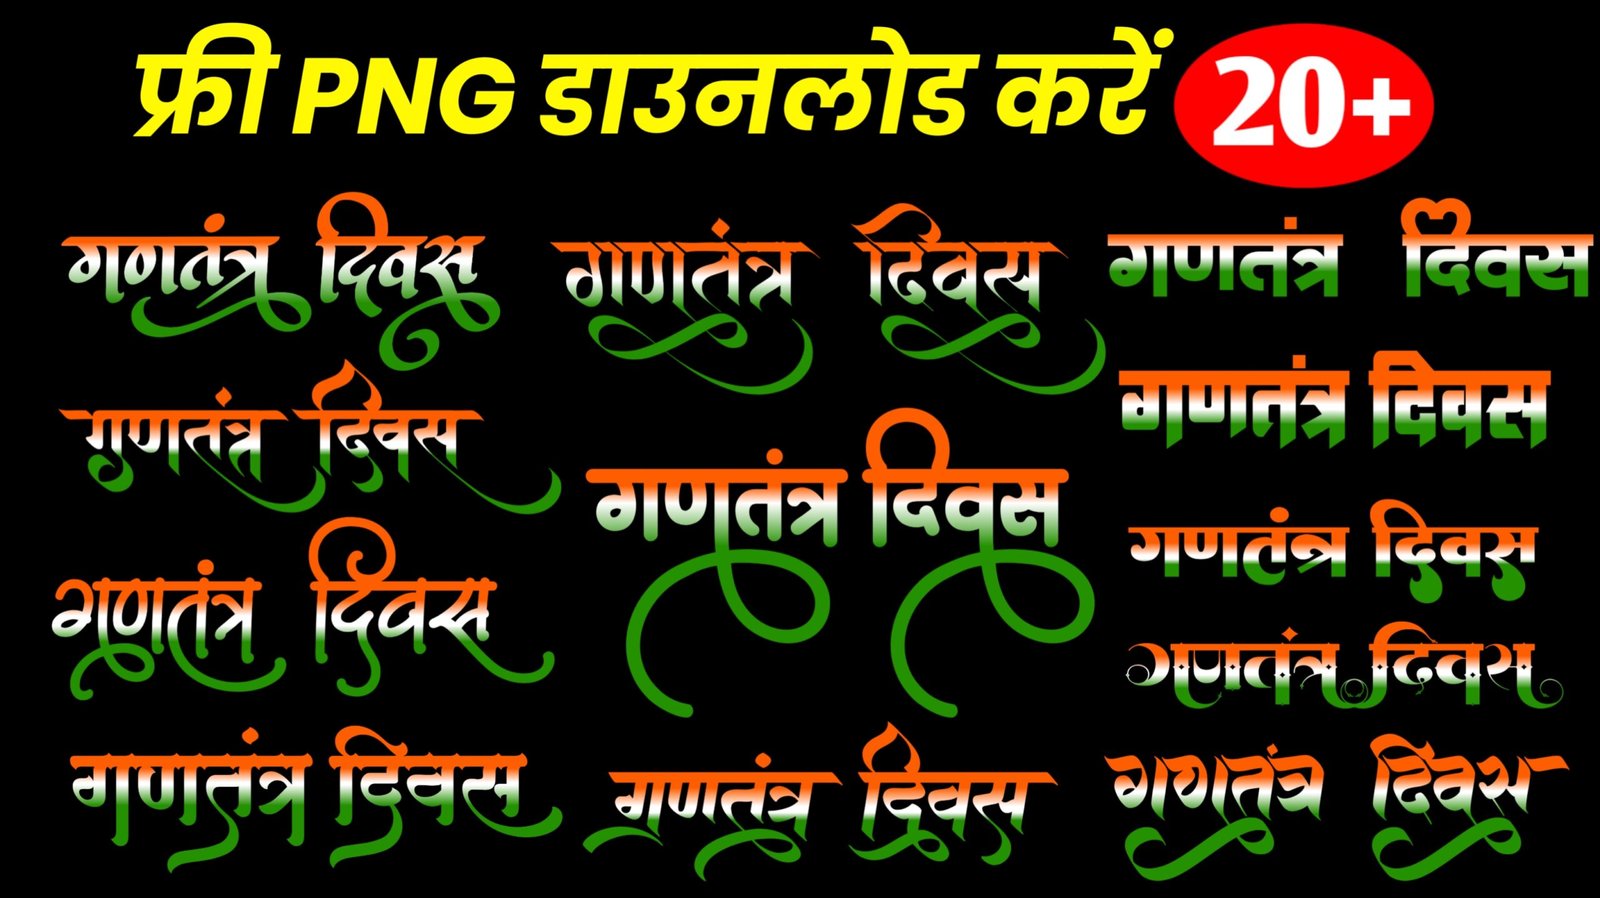 ganatantra Divas text PNG| Republic Day text PNG| 26 January text PNG| ganatantra Divas text PNG| text PNG kaise banaye text PNG kaise download Kare|